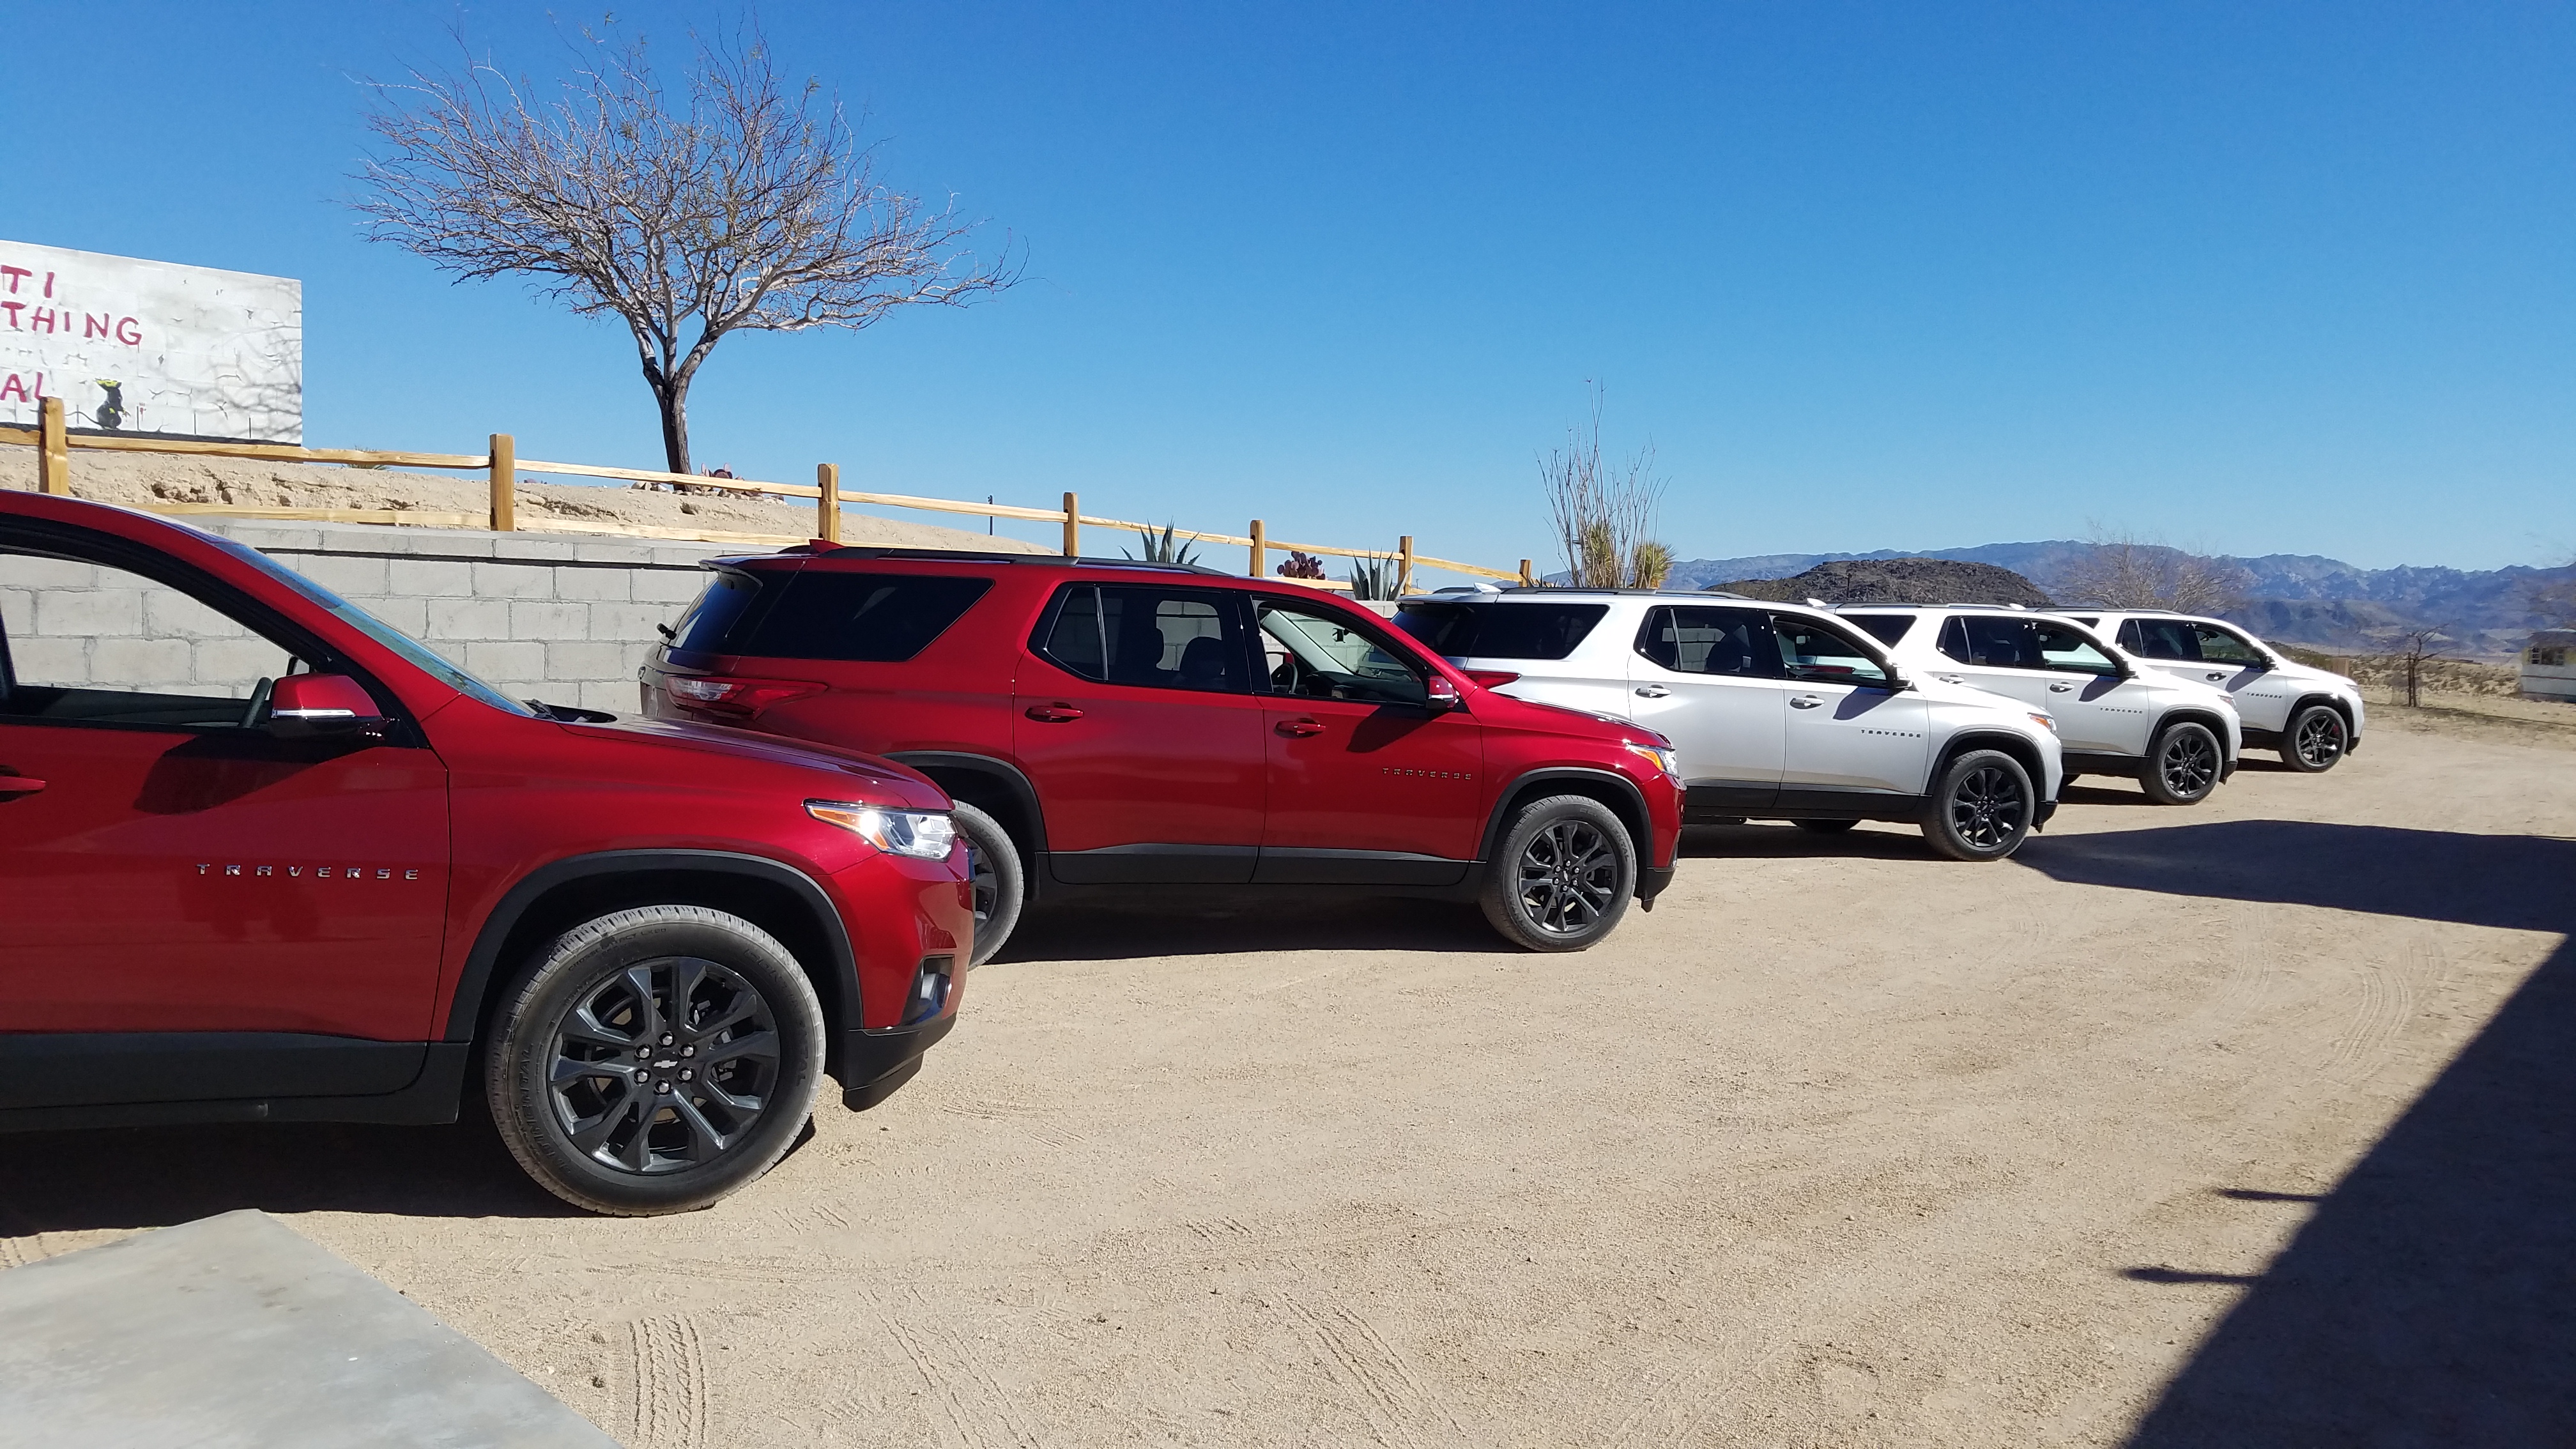 Chevy Traverse Road Trip Lineup | GENTLEMAN WITHIN